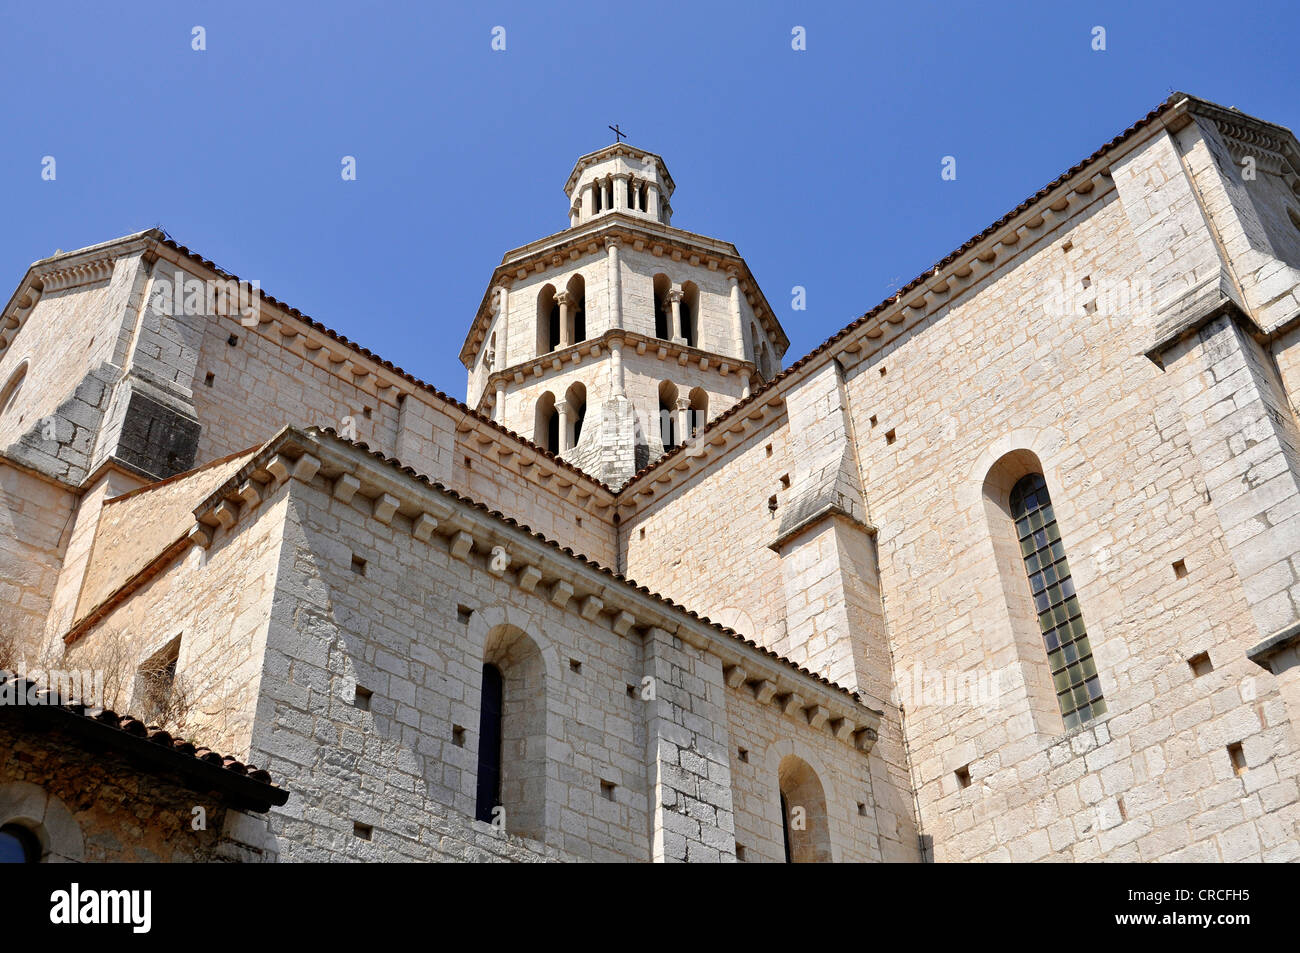 Transept, bell tower and apse of the Gothic basilica of the Cistercian monastery Fossanova Abbey, near Priverno, Lazio, Italy Stock Photo